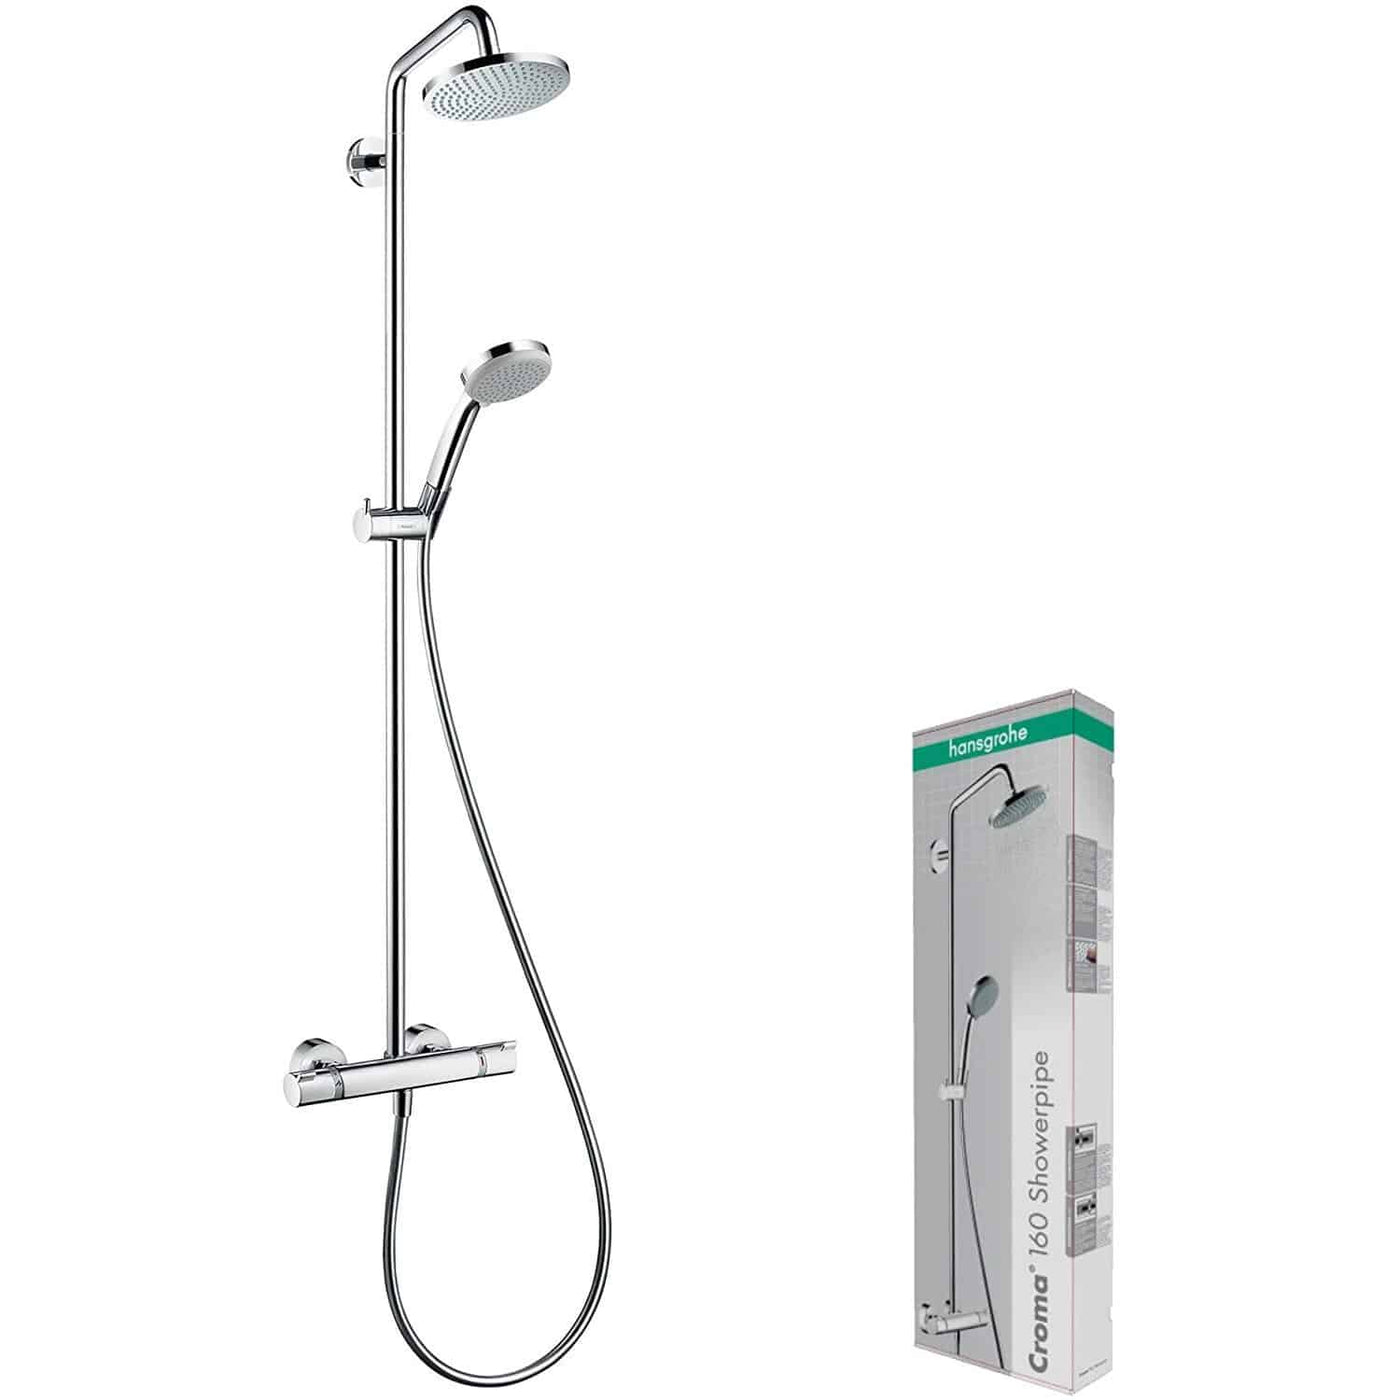 Haji Gallery,Hansgrohe,Croma Shower Pipe 160 1jet with Thermostat,Showers.